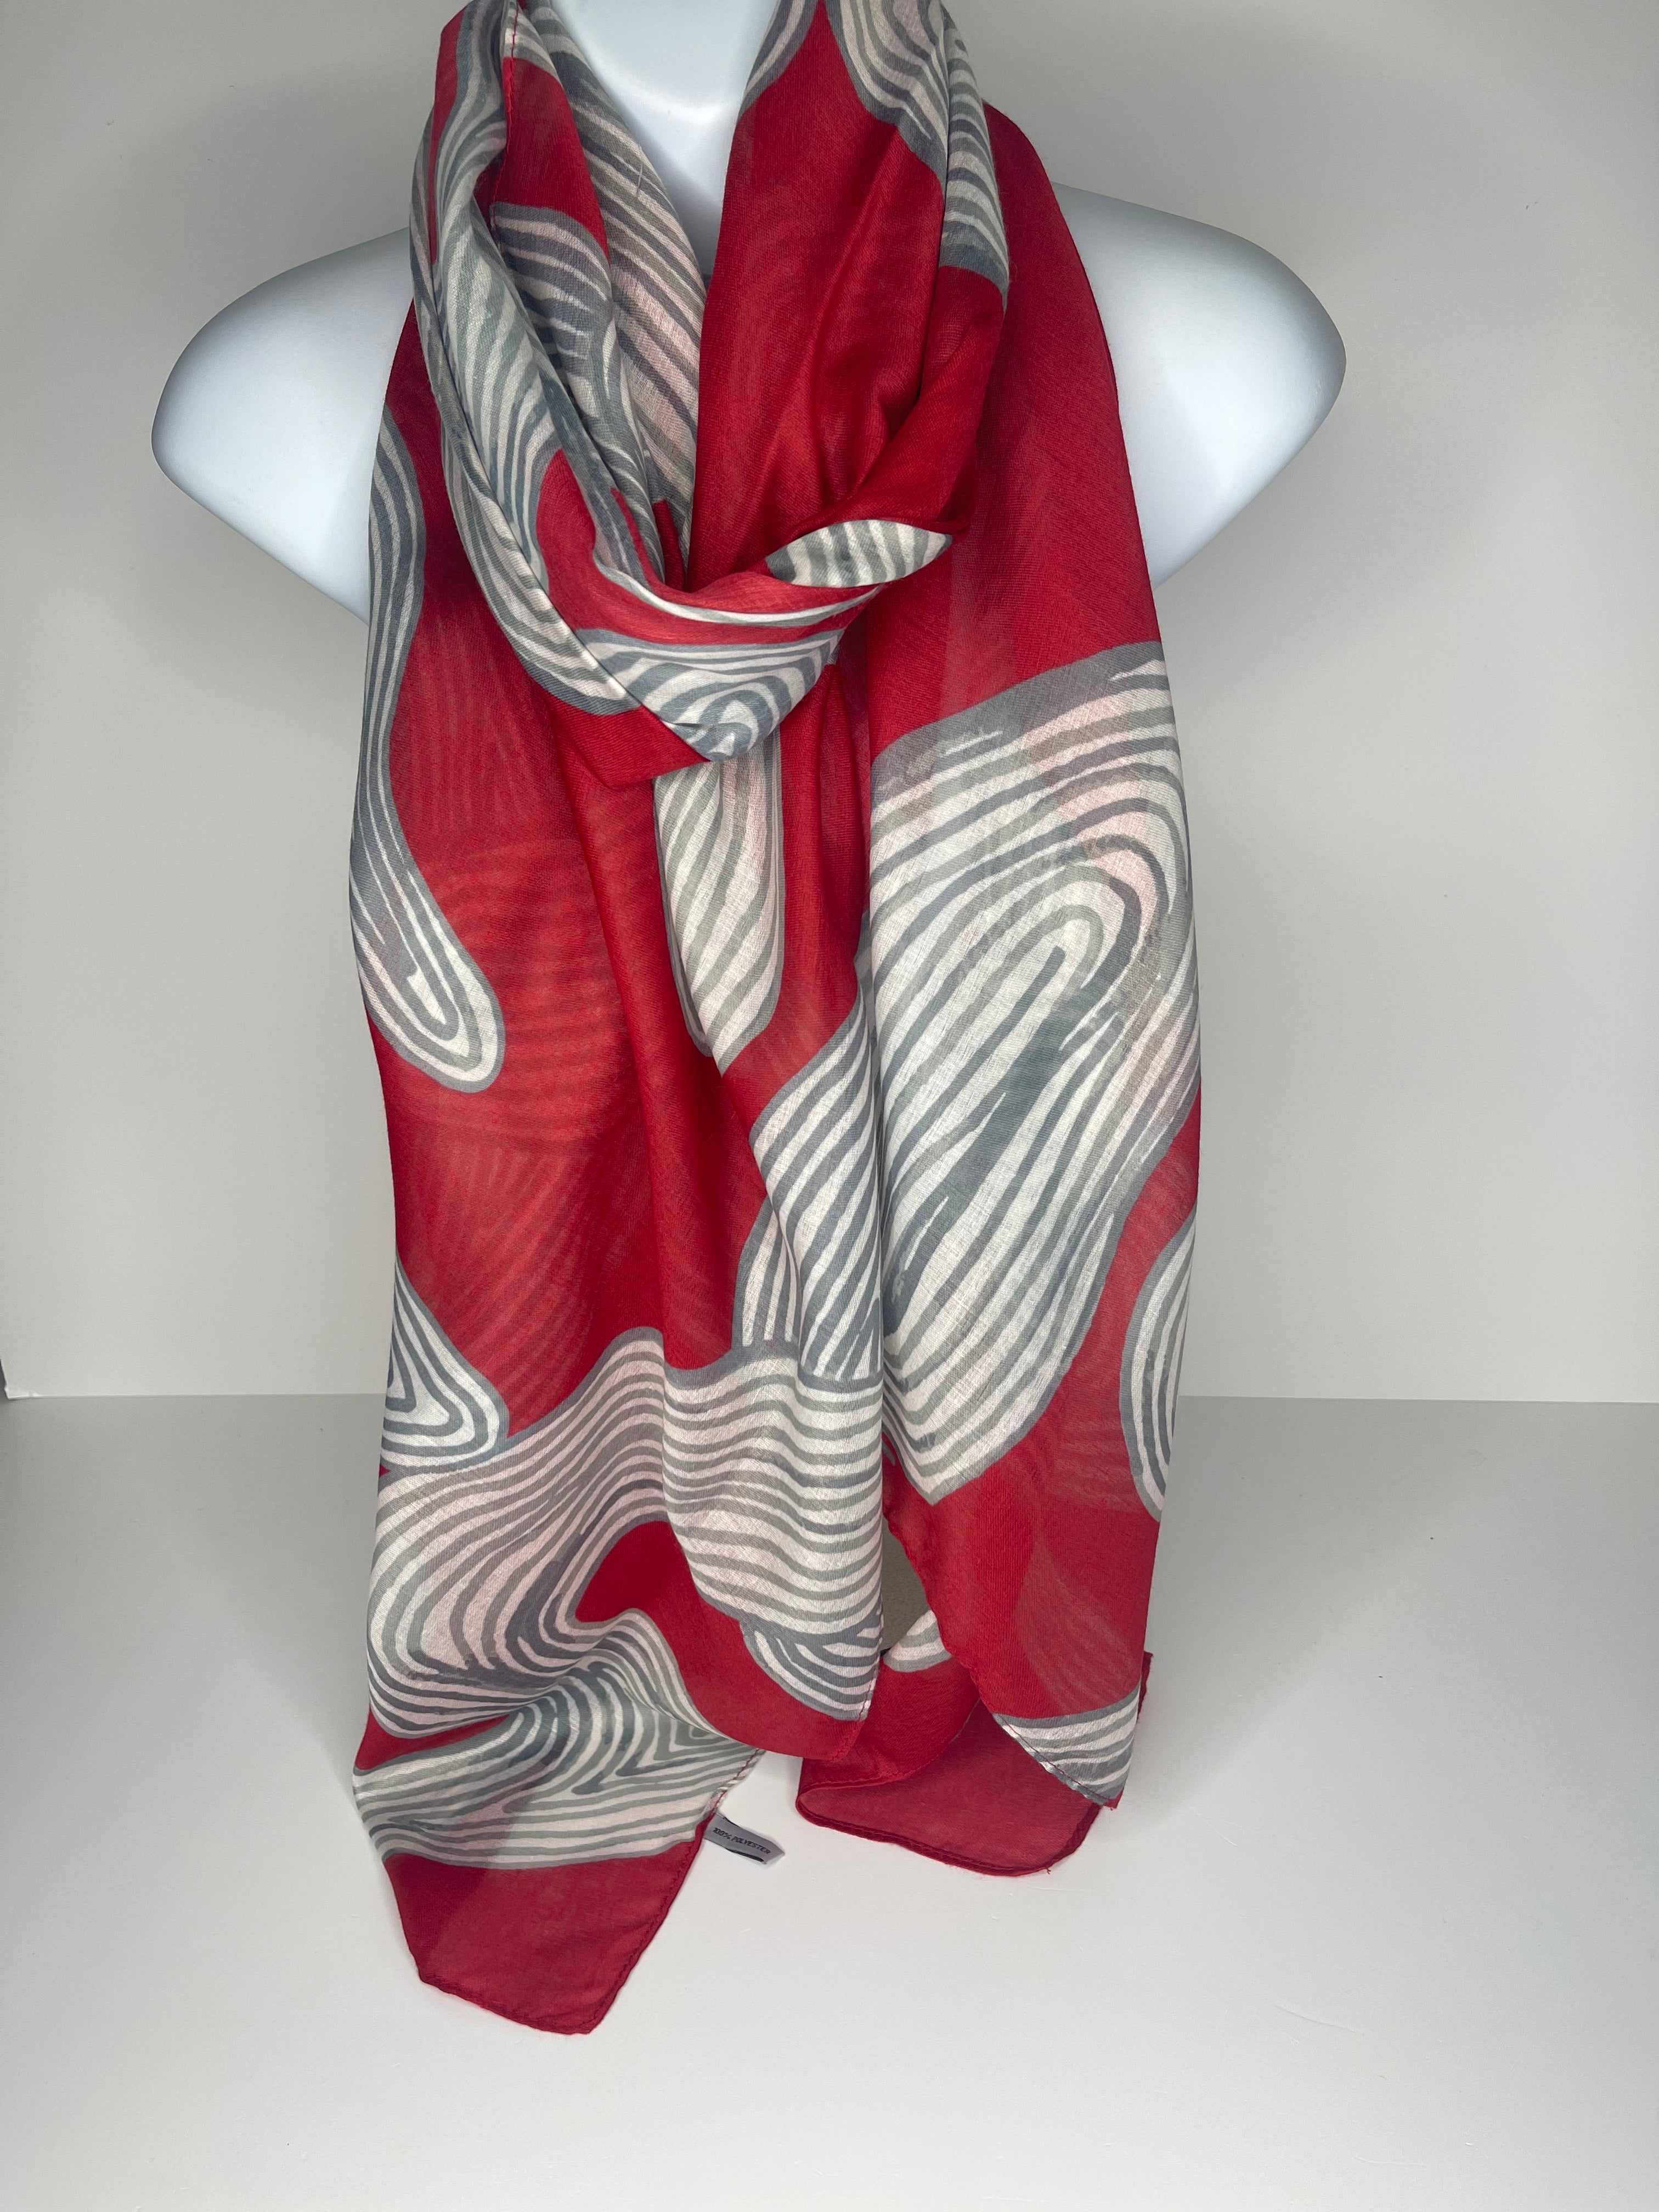 Lighter weight abstract grey and cream print scarf in shades of red